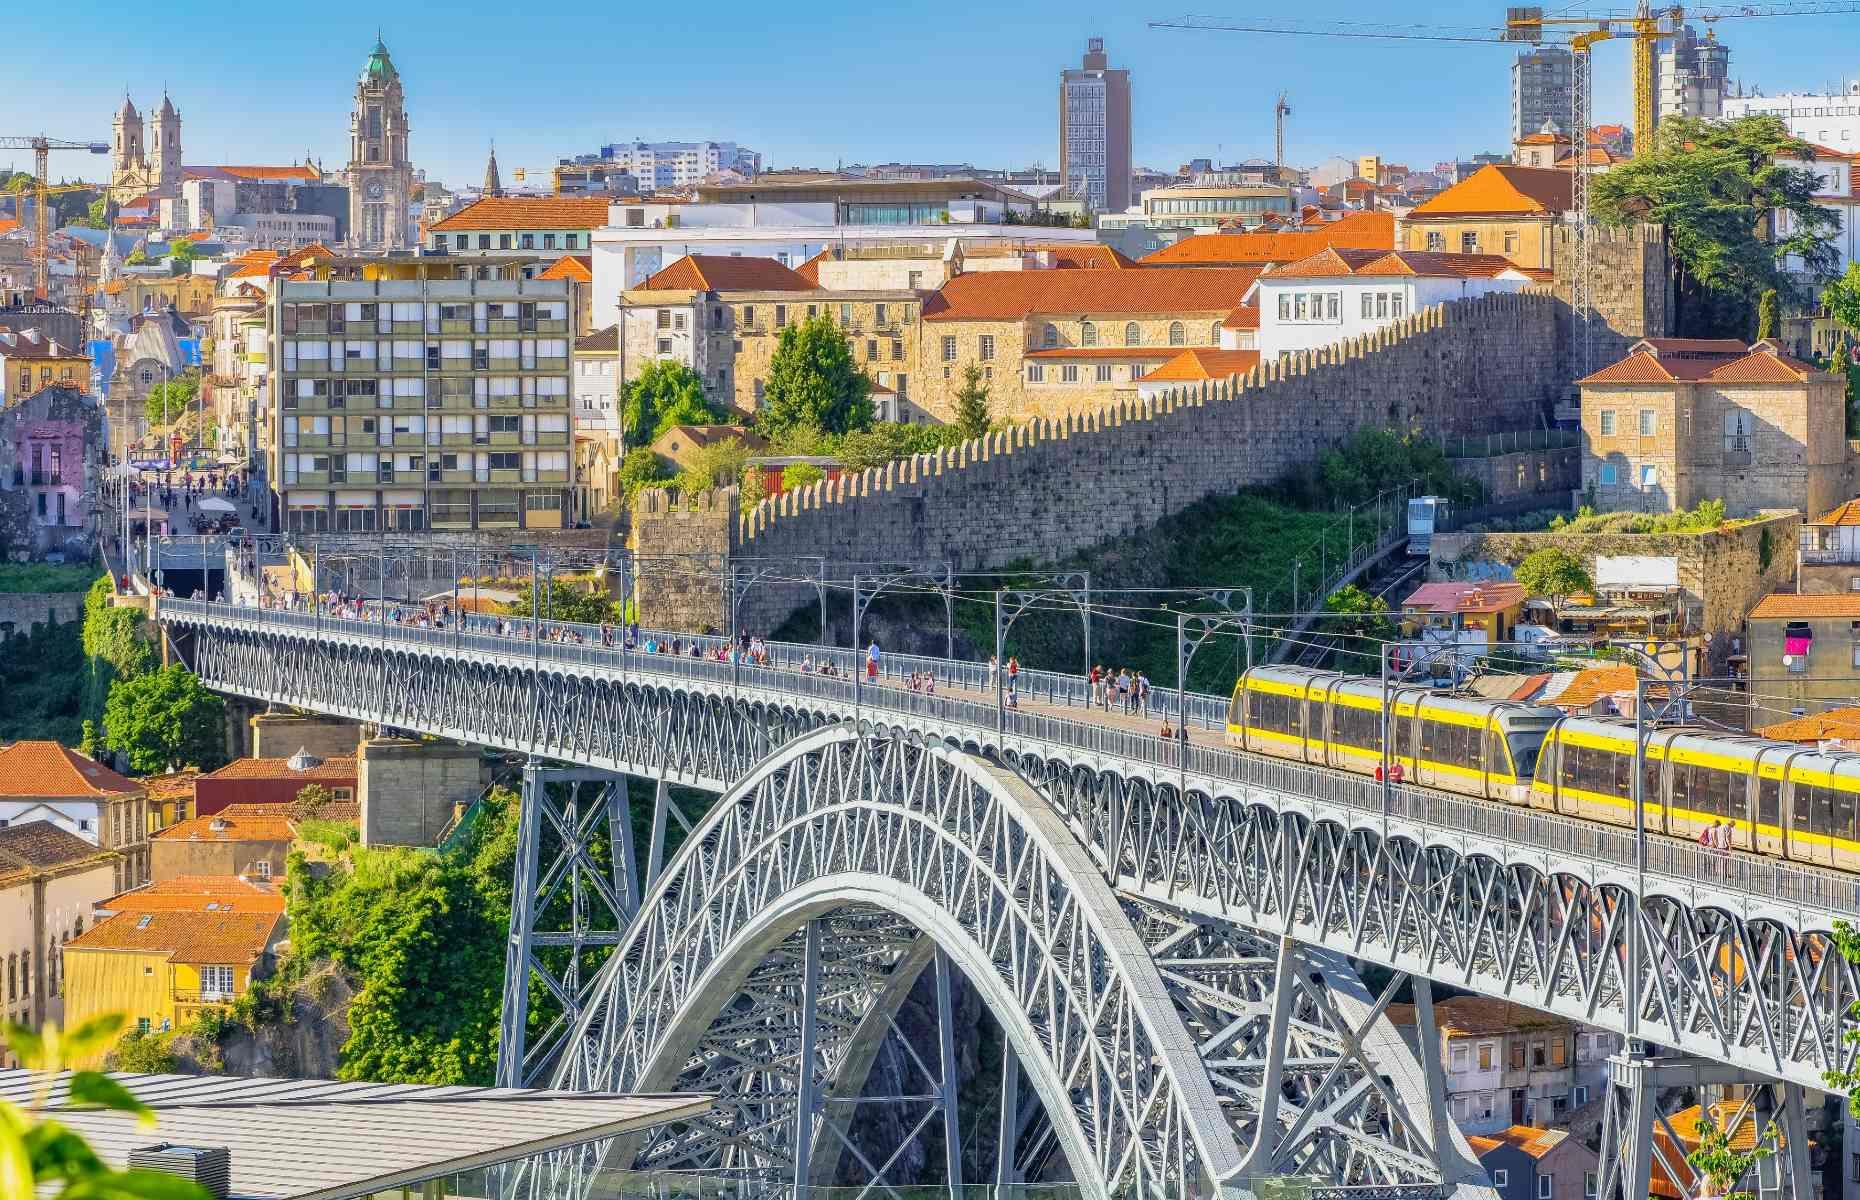 <p>In November 2022, the vision for an advanced high-speed rail link between the Portuguese cities of Porto (pictured) and Lisbon and Vigo in Galicia, northwest Spain, was laid out by the Portuguese government. While the existing fast service between the country's capital and second cities takes just under three hours, this new proposal could see the journey time more than halved to one hour and 15 minutes. Extending the route to Vigo will allow passengers to travel the length of Iberia's Atlantic coast at speeds of around 186 miles per hour (300km/h).</p>